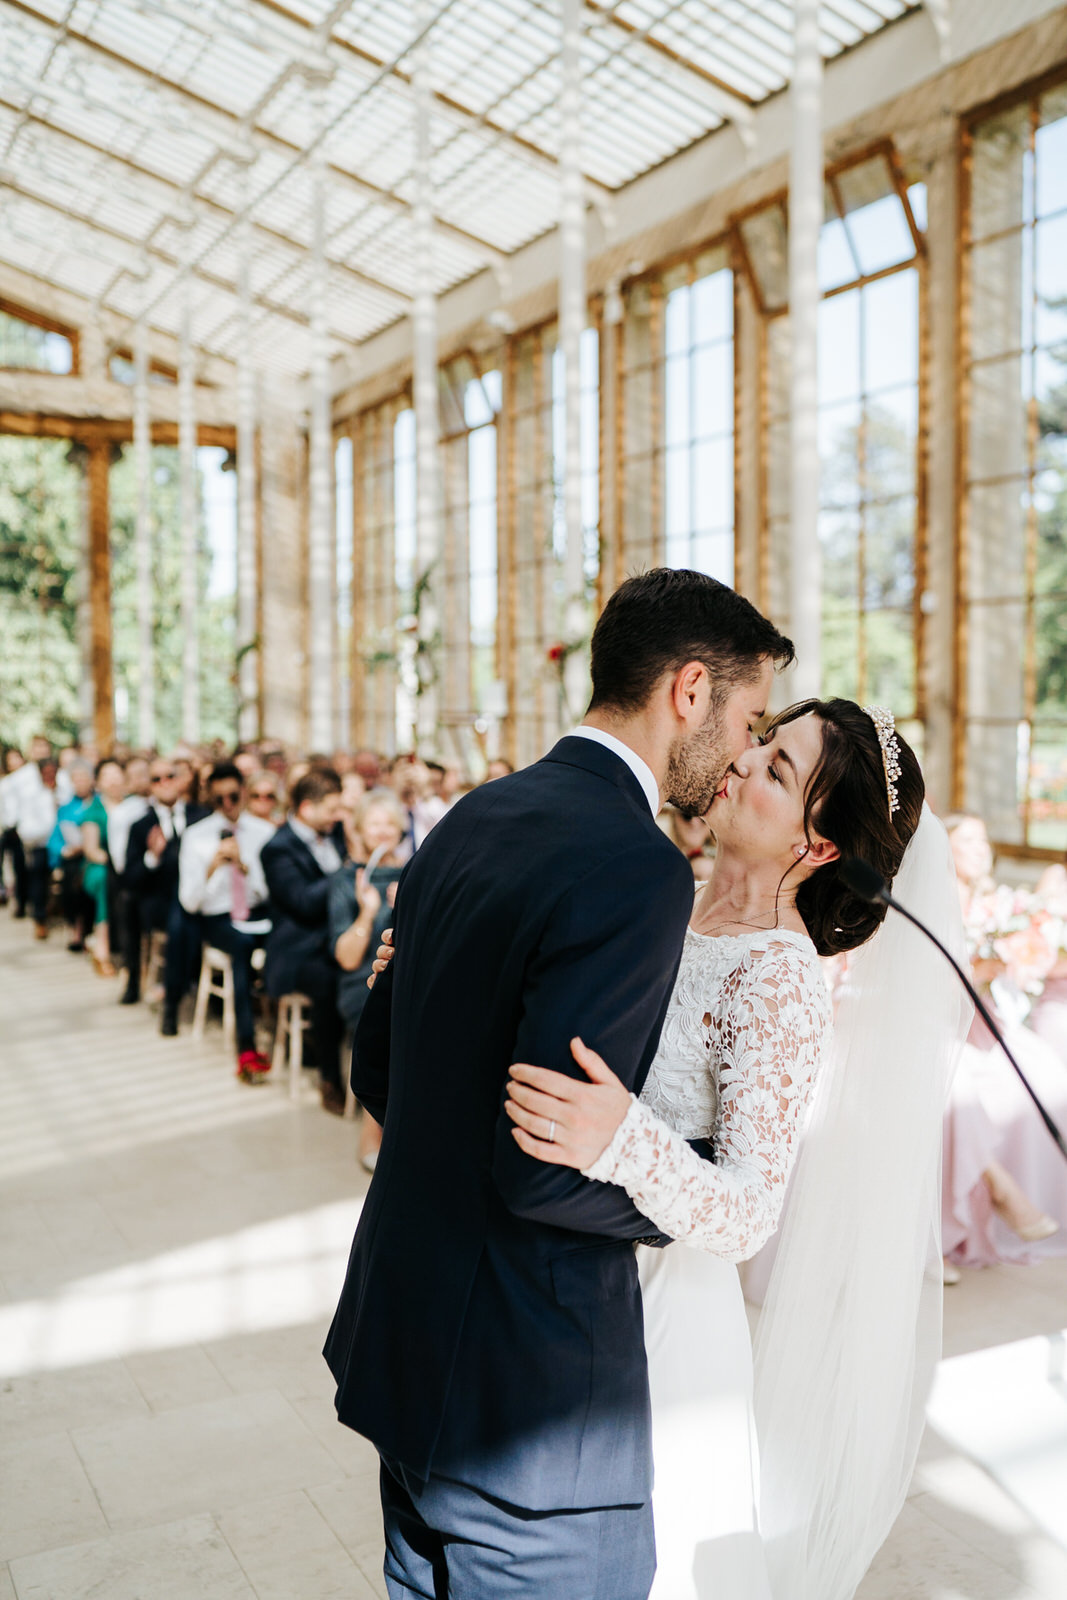  First kiss at nash conservatory wedding at Kew Gardens while guests, out of focus, look from the back. 